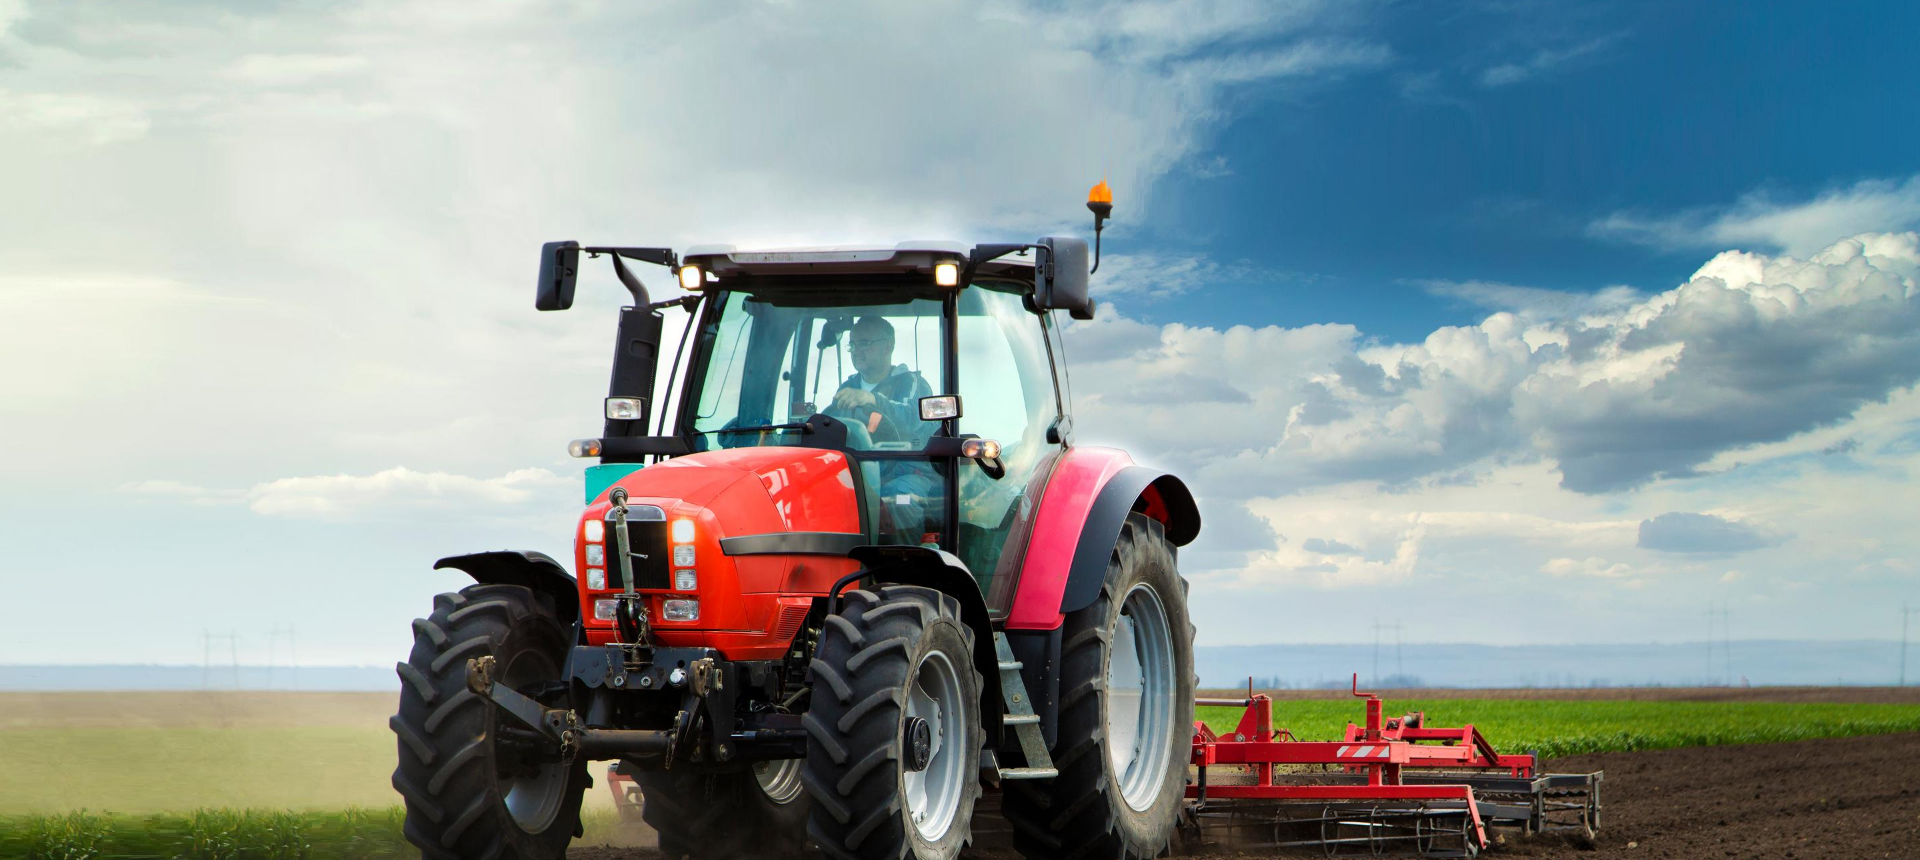 Manufacturer & Exporter of Tractor Parts India | Grab International